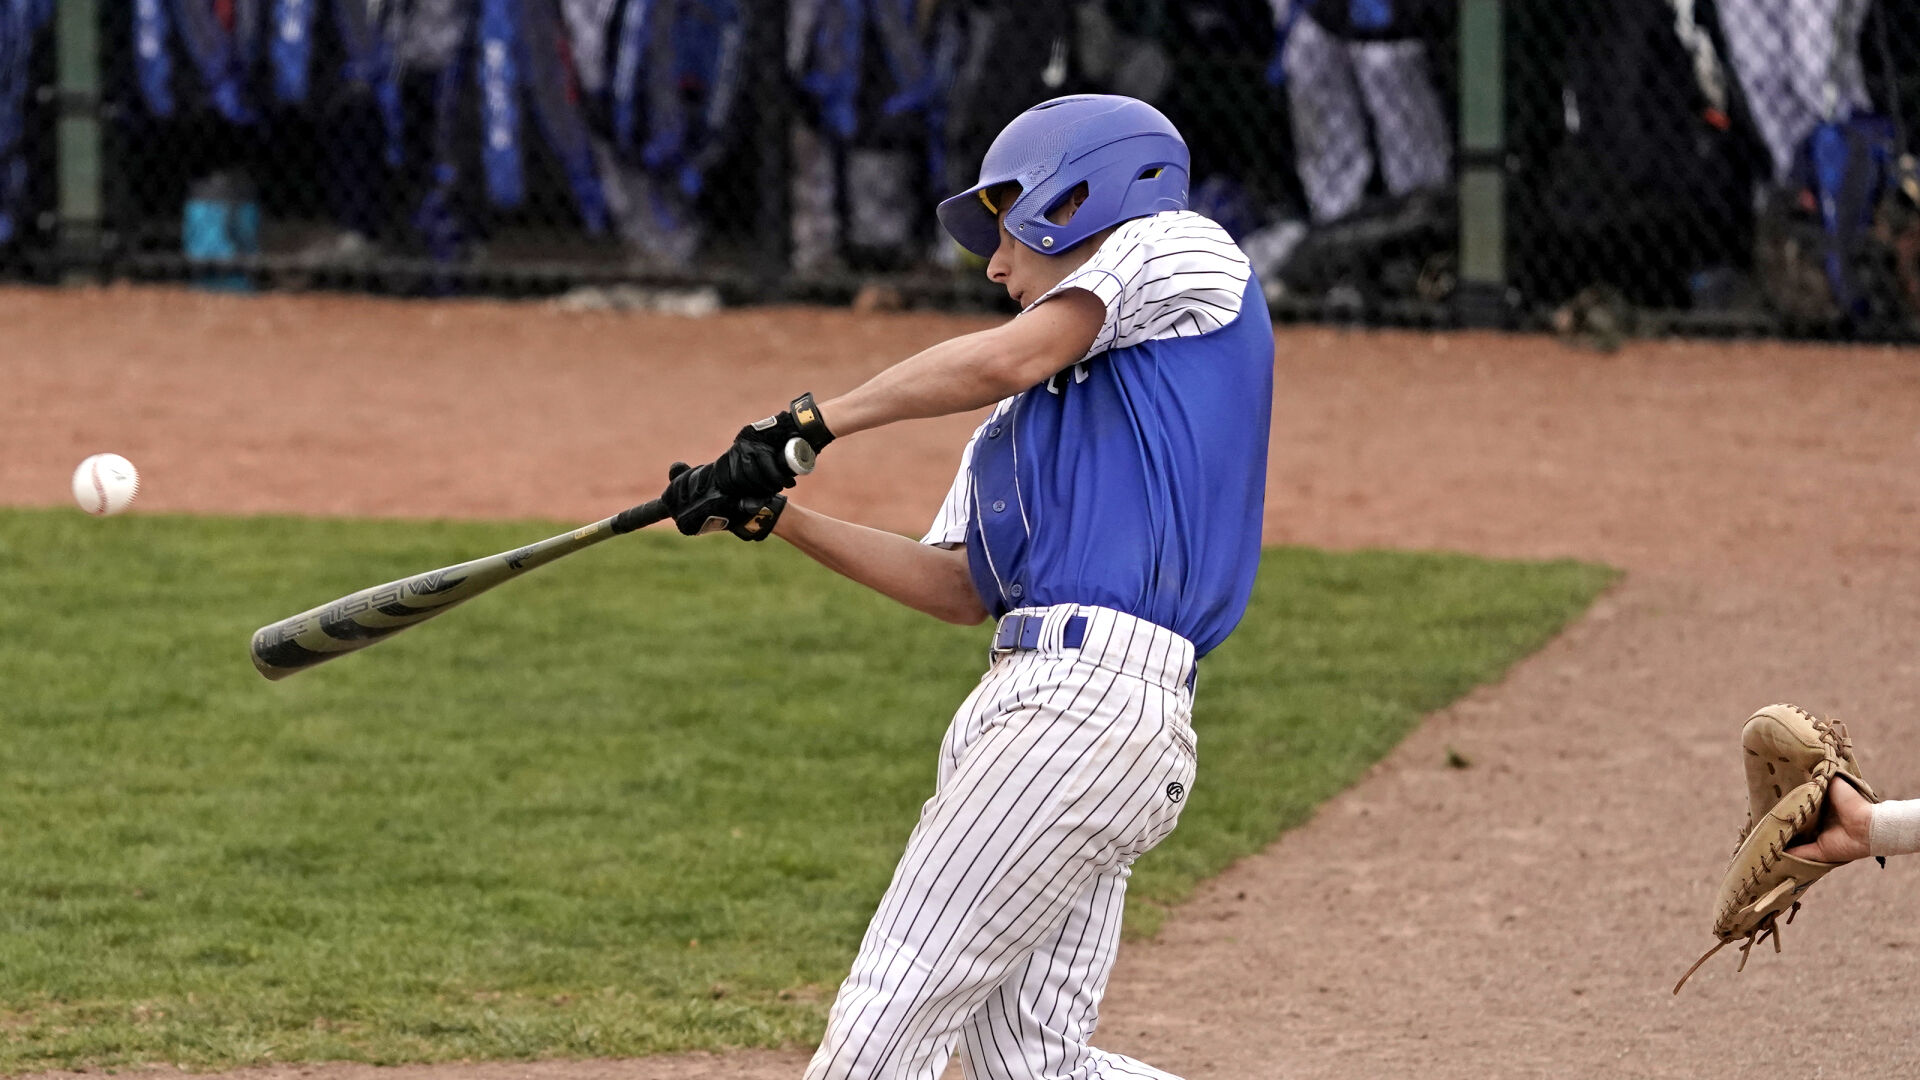 Plainville baseball holds off New Britain for 2-0 victory in first of two meetings this week